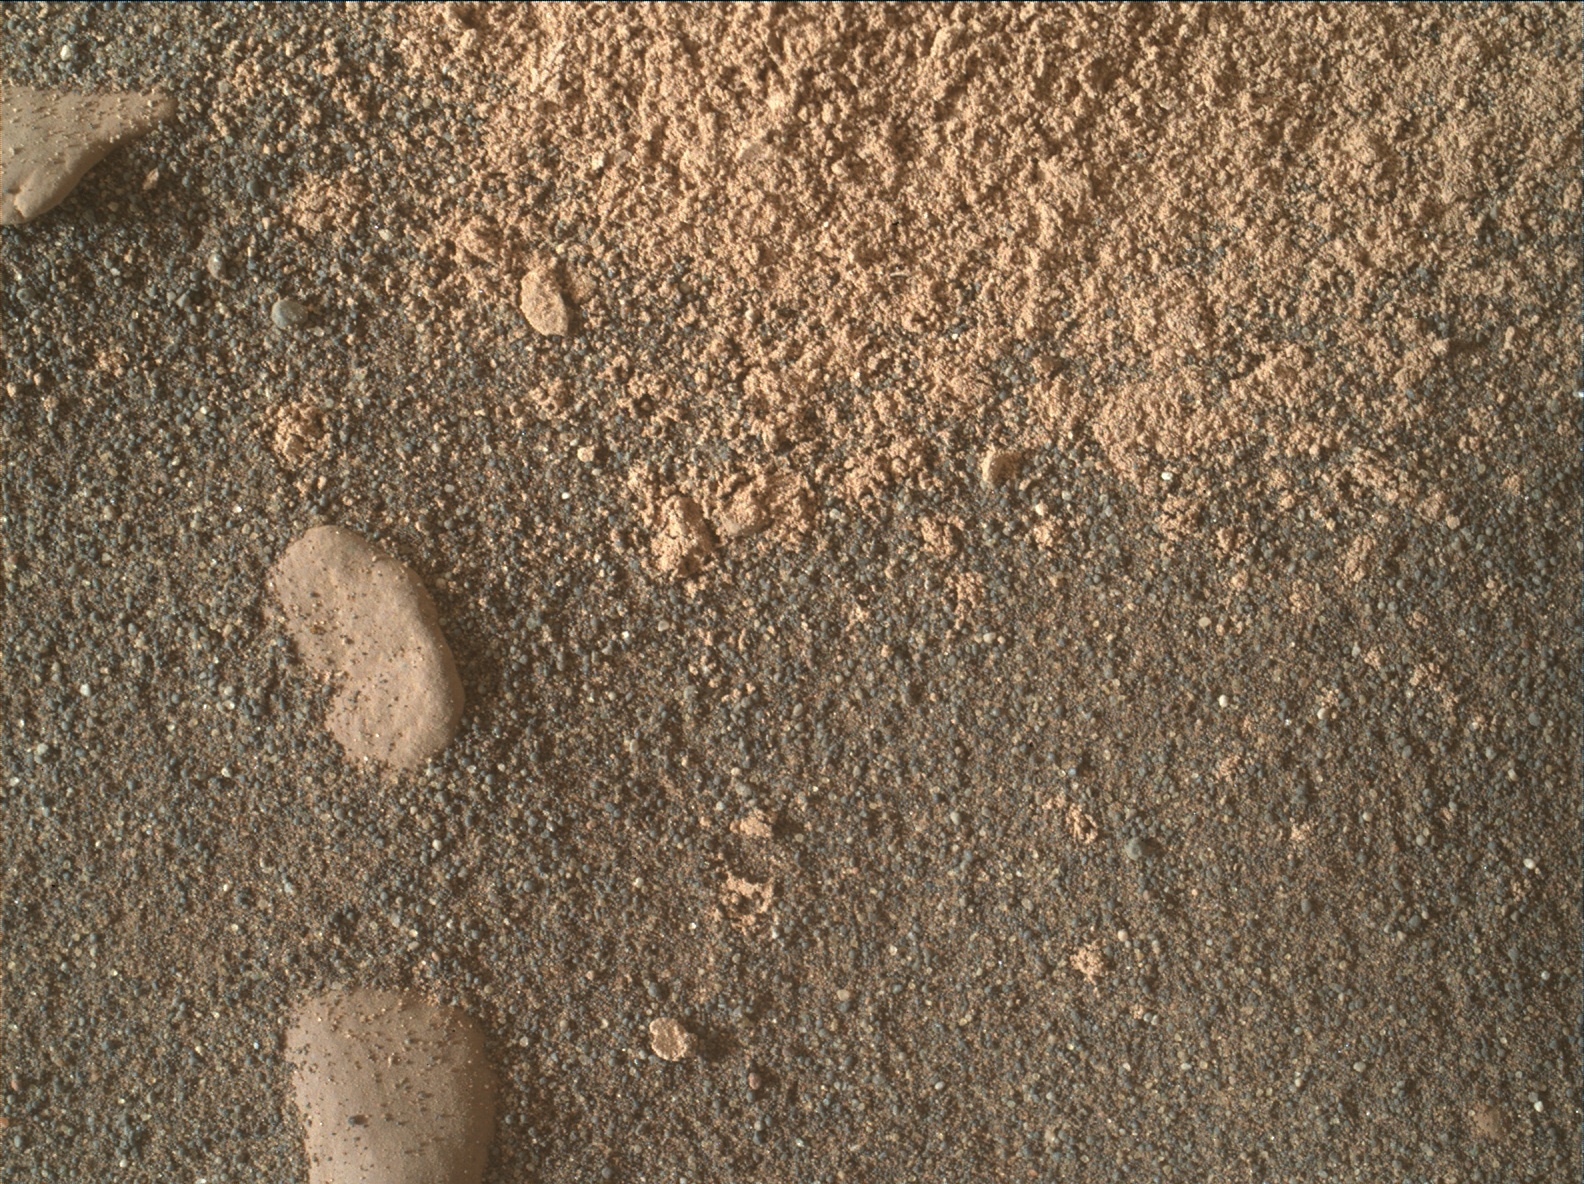 Nasa's Mars rover Curiosity acquired this image using its Mars Hand Lens Imager (MAHLI) on Sol 2377